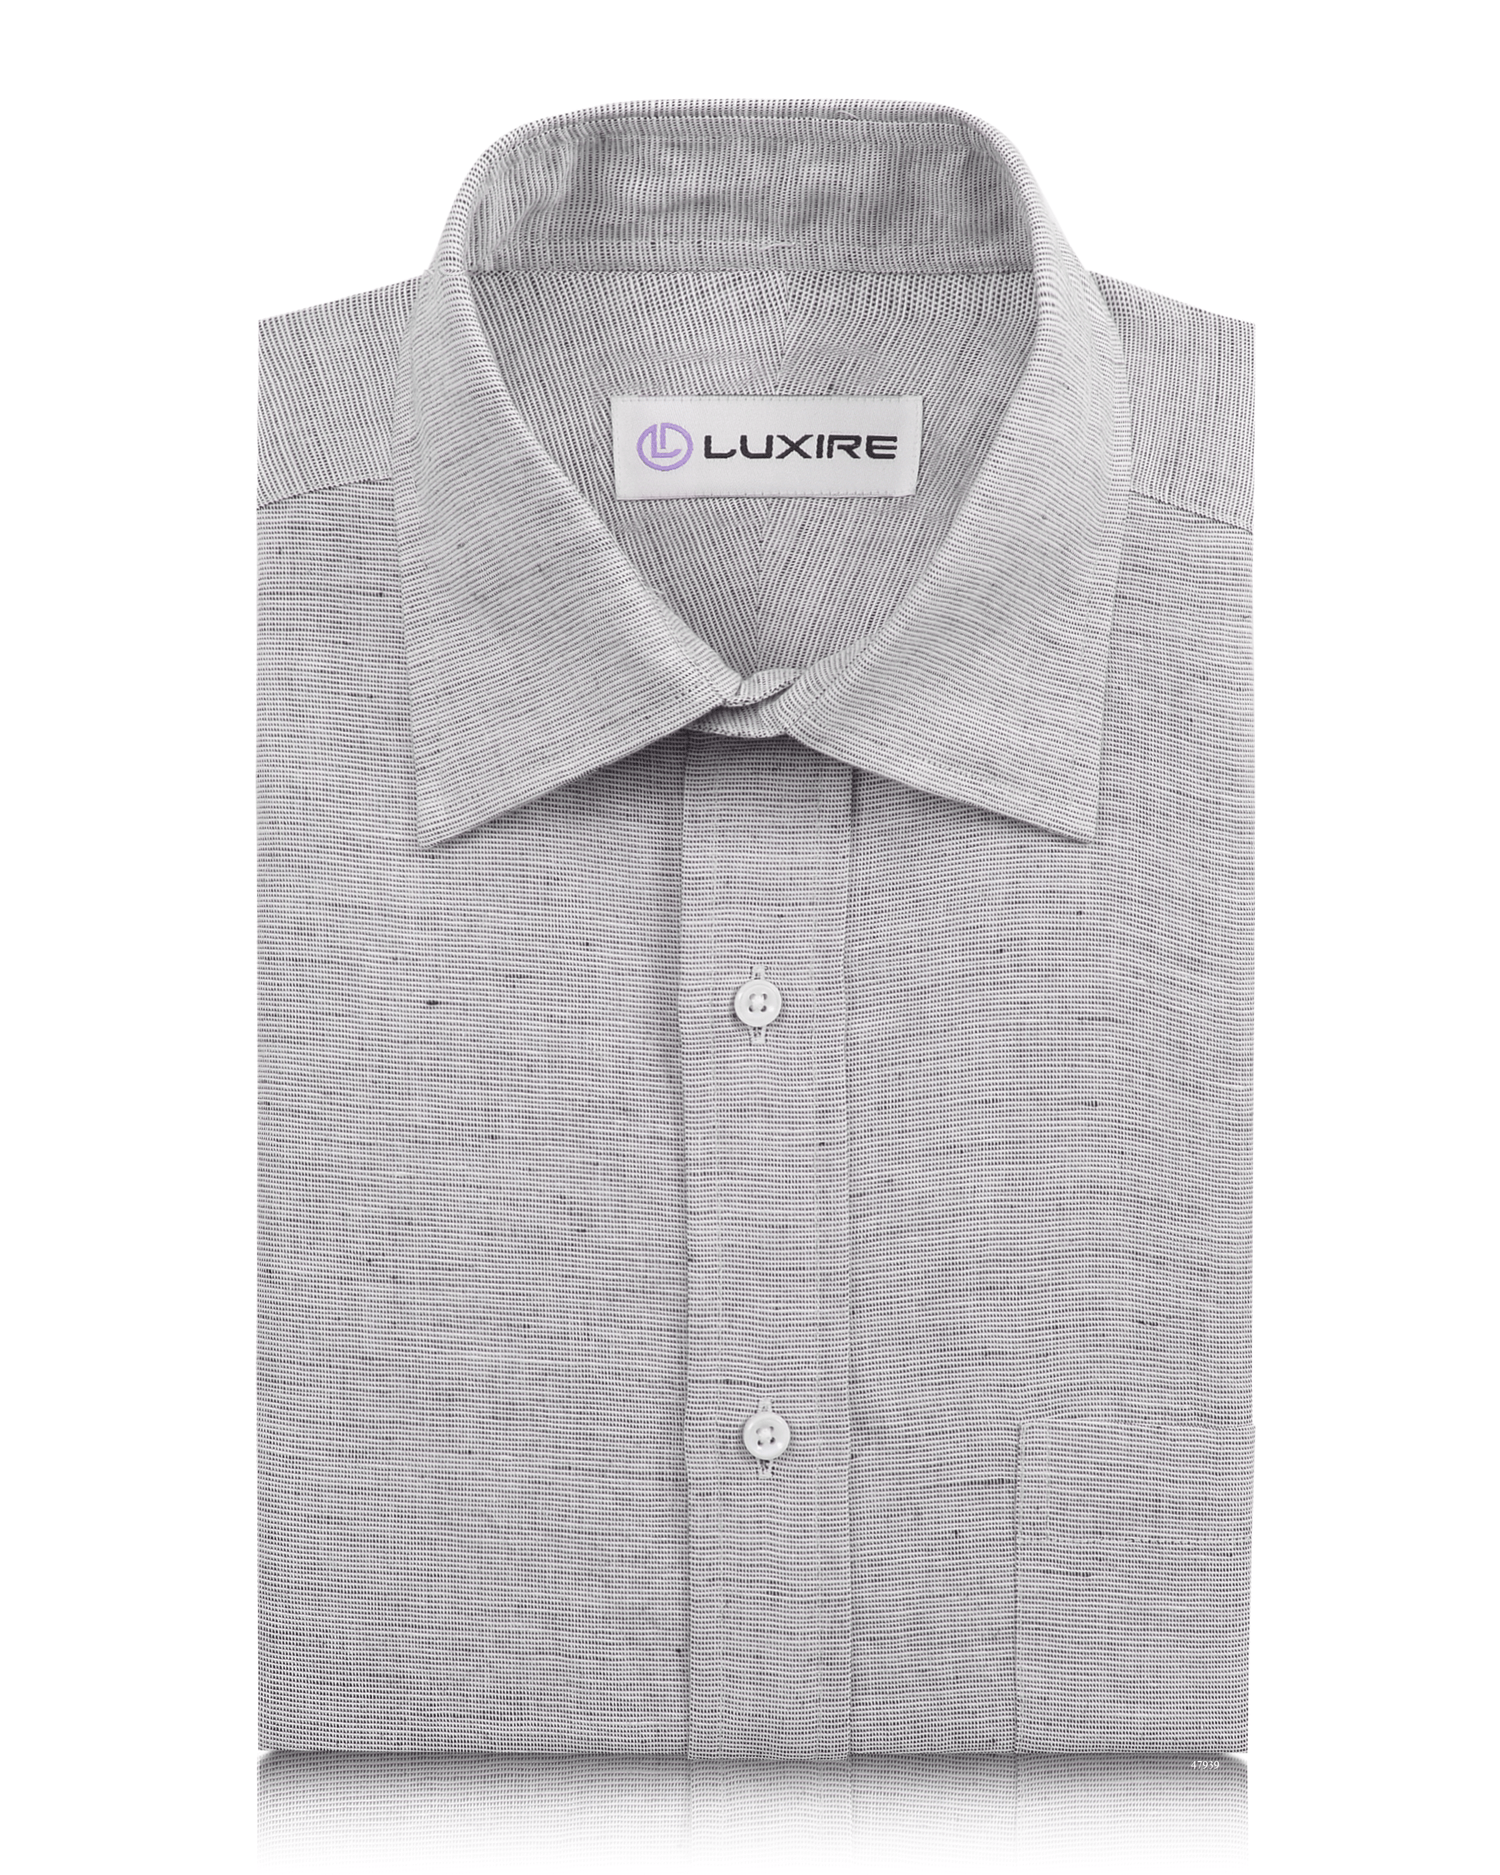 Front of the custom linen shirt for men in black and white chambray by Luxire Clothing